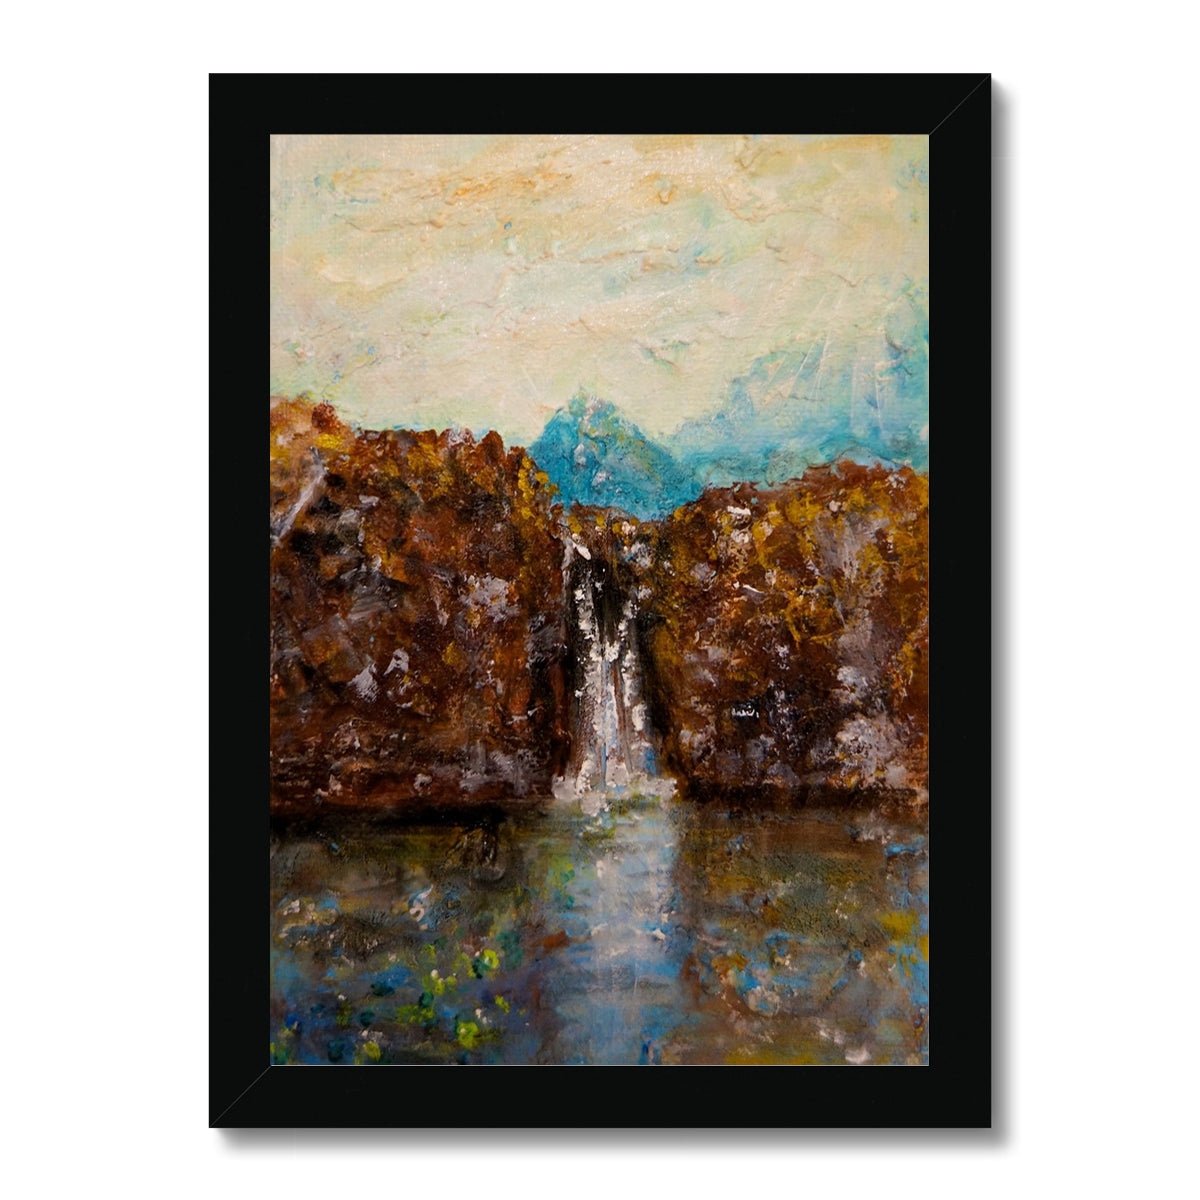 Skye Fairy Pools Painting | Framed Prints From Scotland-Framed Prints-Skye Art Gallery-A4 Portrait-Black Frame-Paintings, Prints, Homeware, Art Gifts From Scotland By Scottish Artist Kevin Hunter